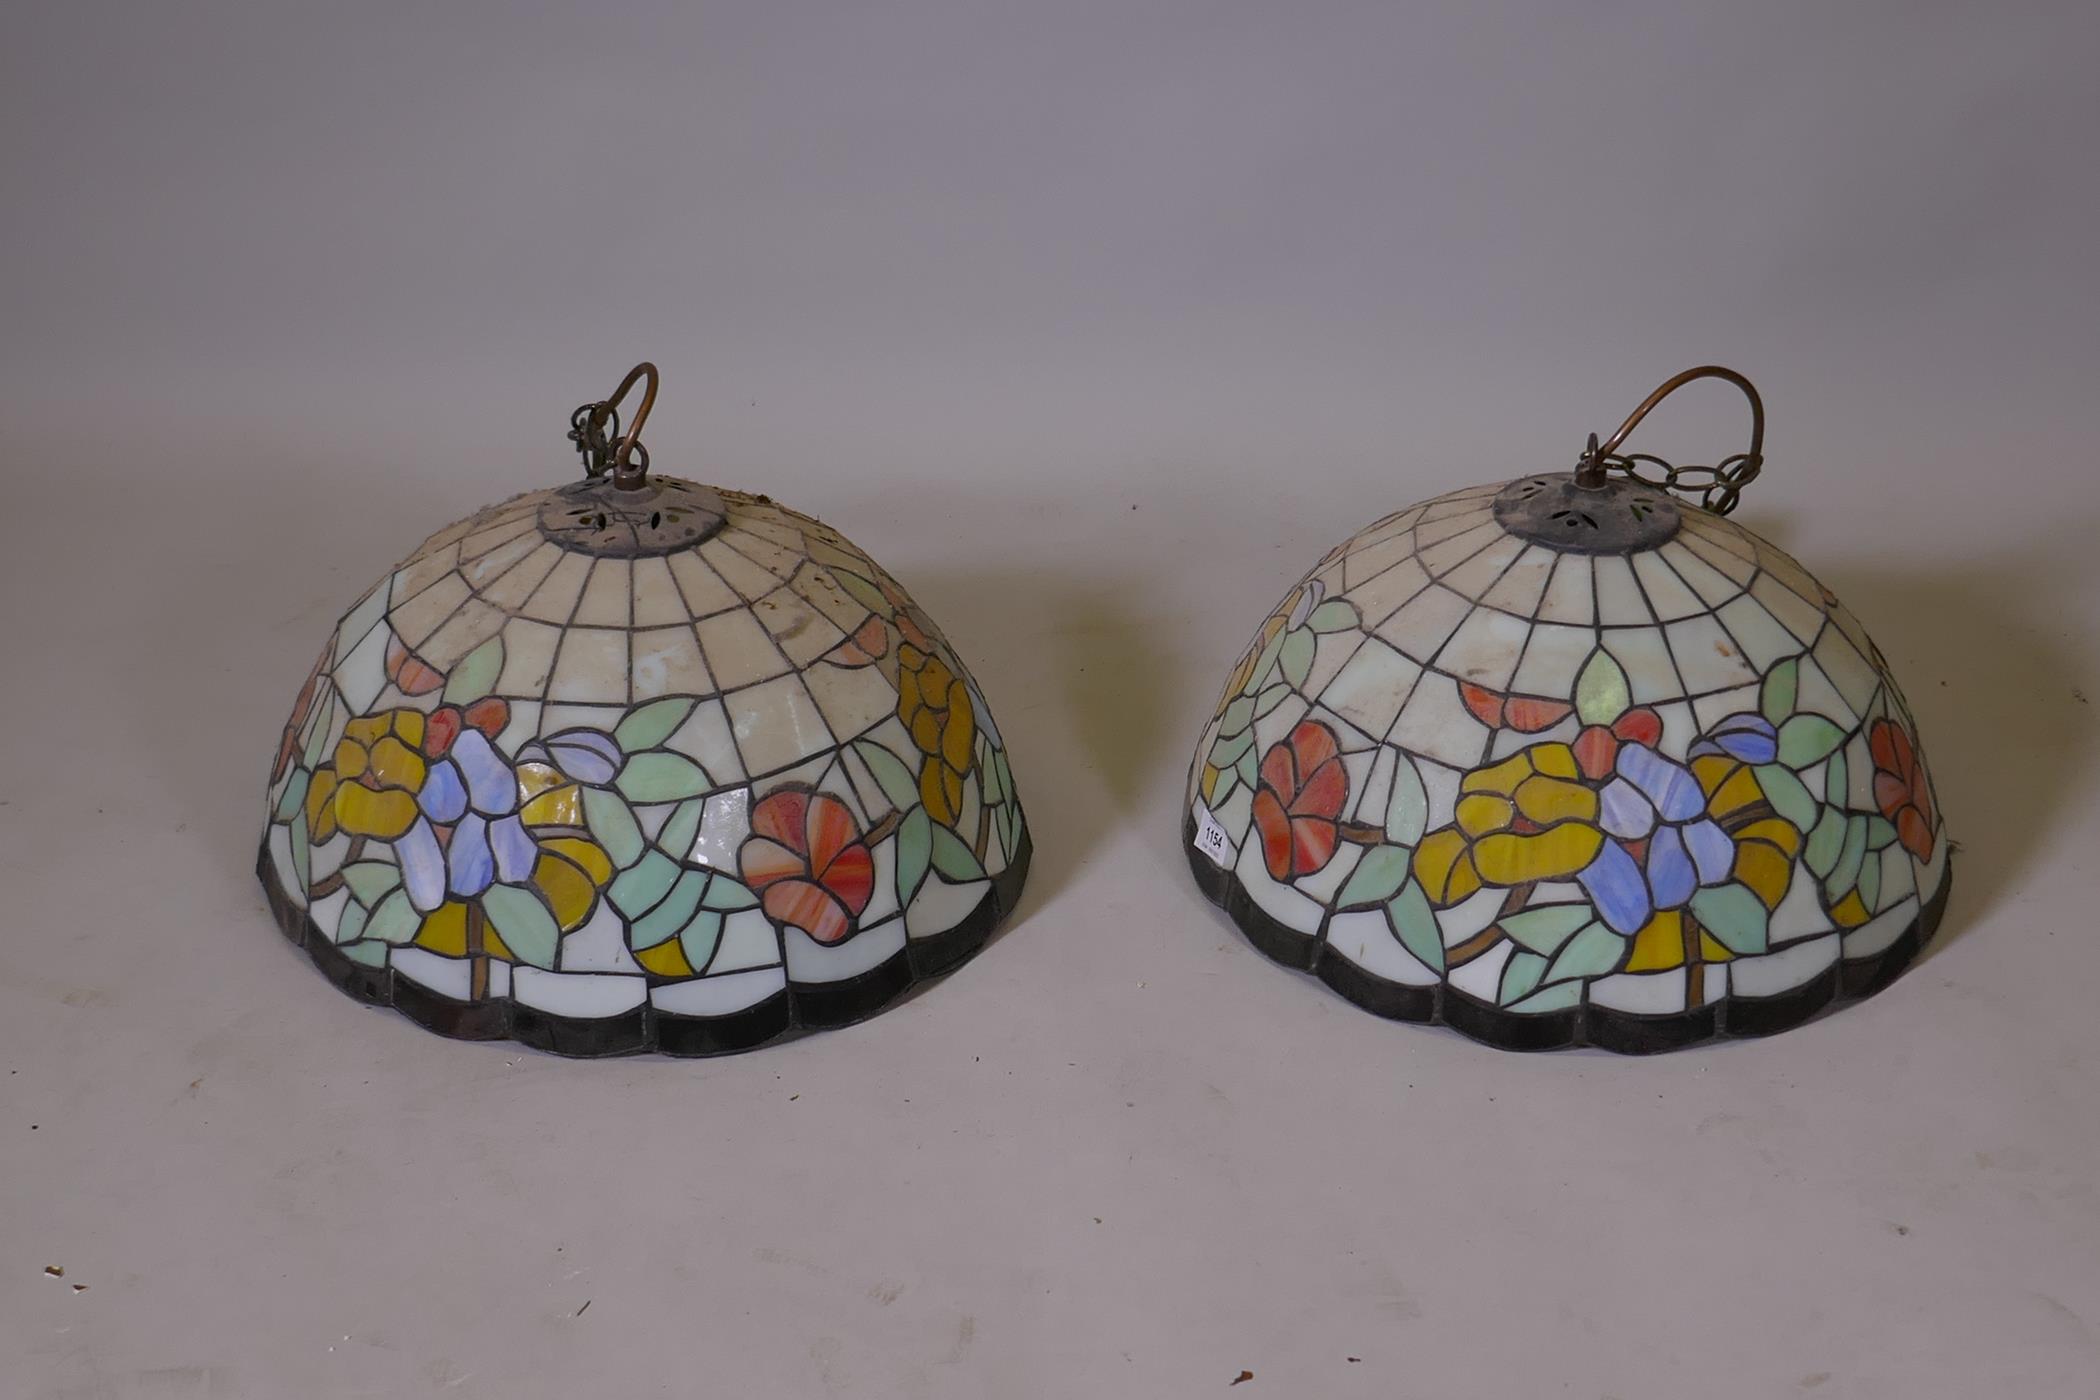 A pair of Tiffany style glass ceiling lamp shades, 15" diameter x 10" high